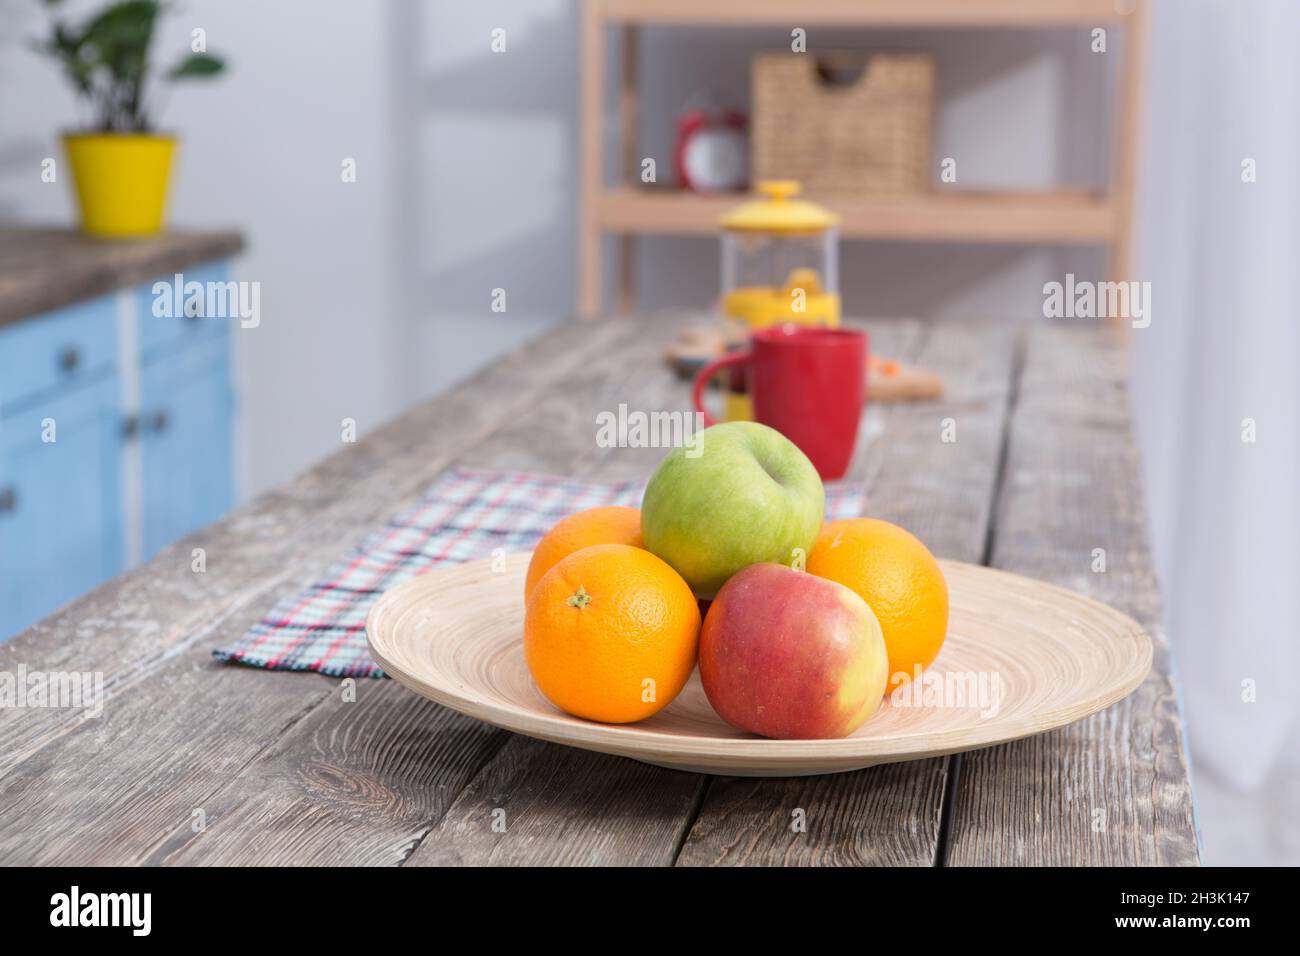 Close up view on fruit on a table at kitchens wooden table. Stock Photo